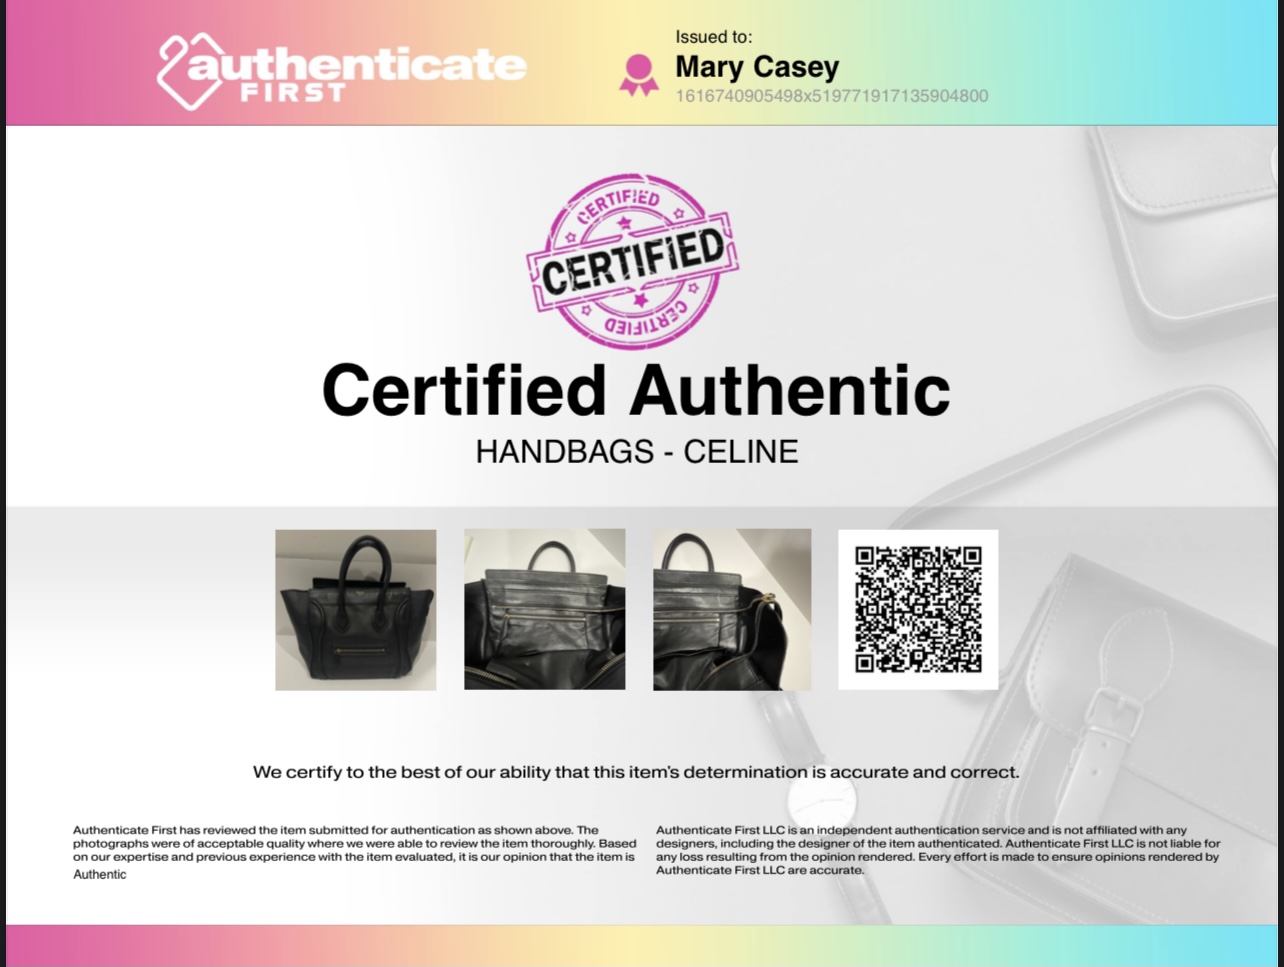 We Authenticate Hermes - REAL AUTHENTICATION